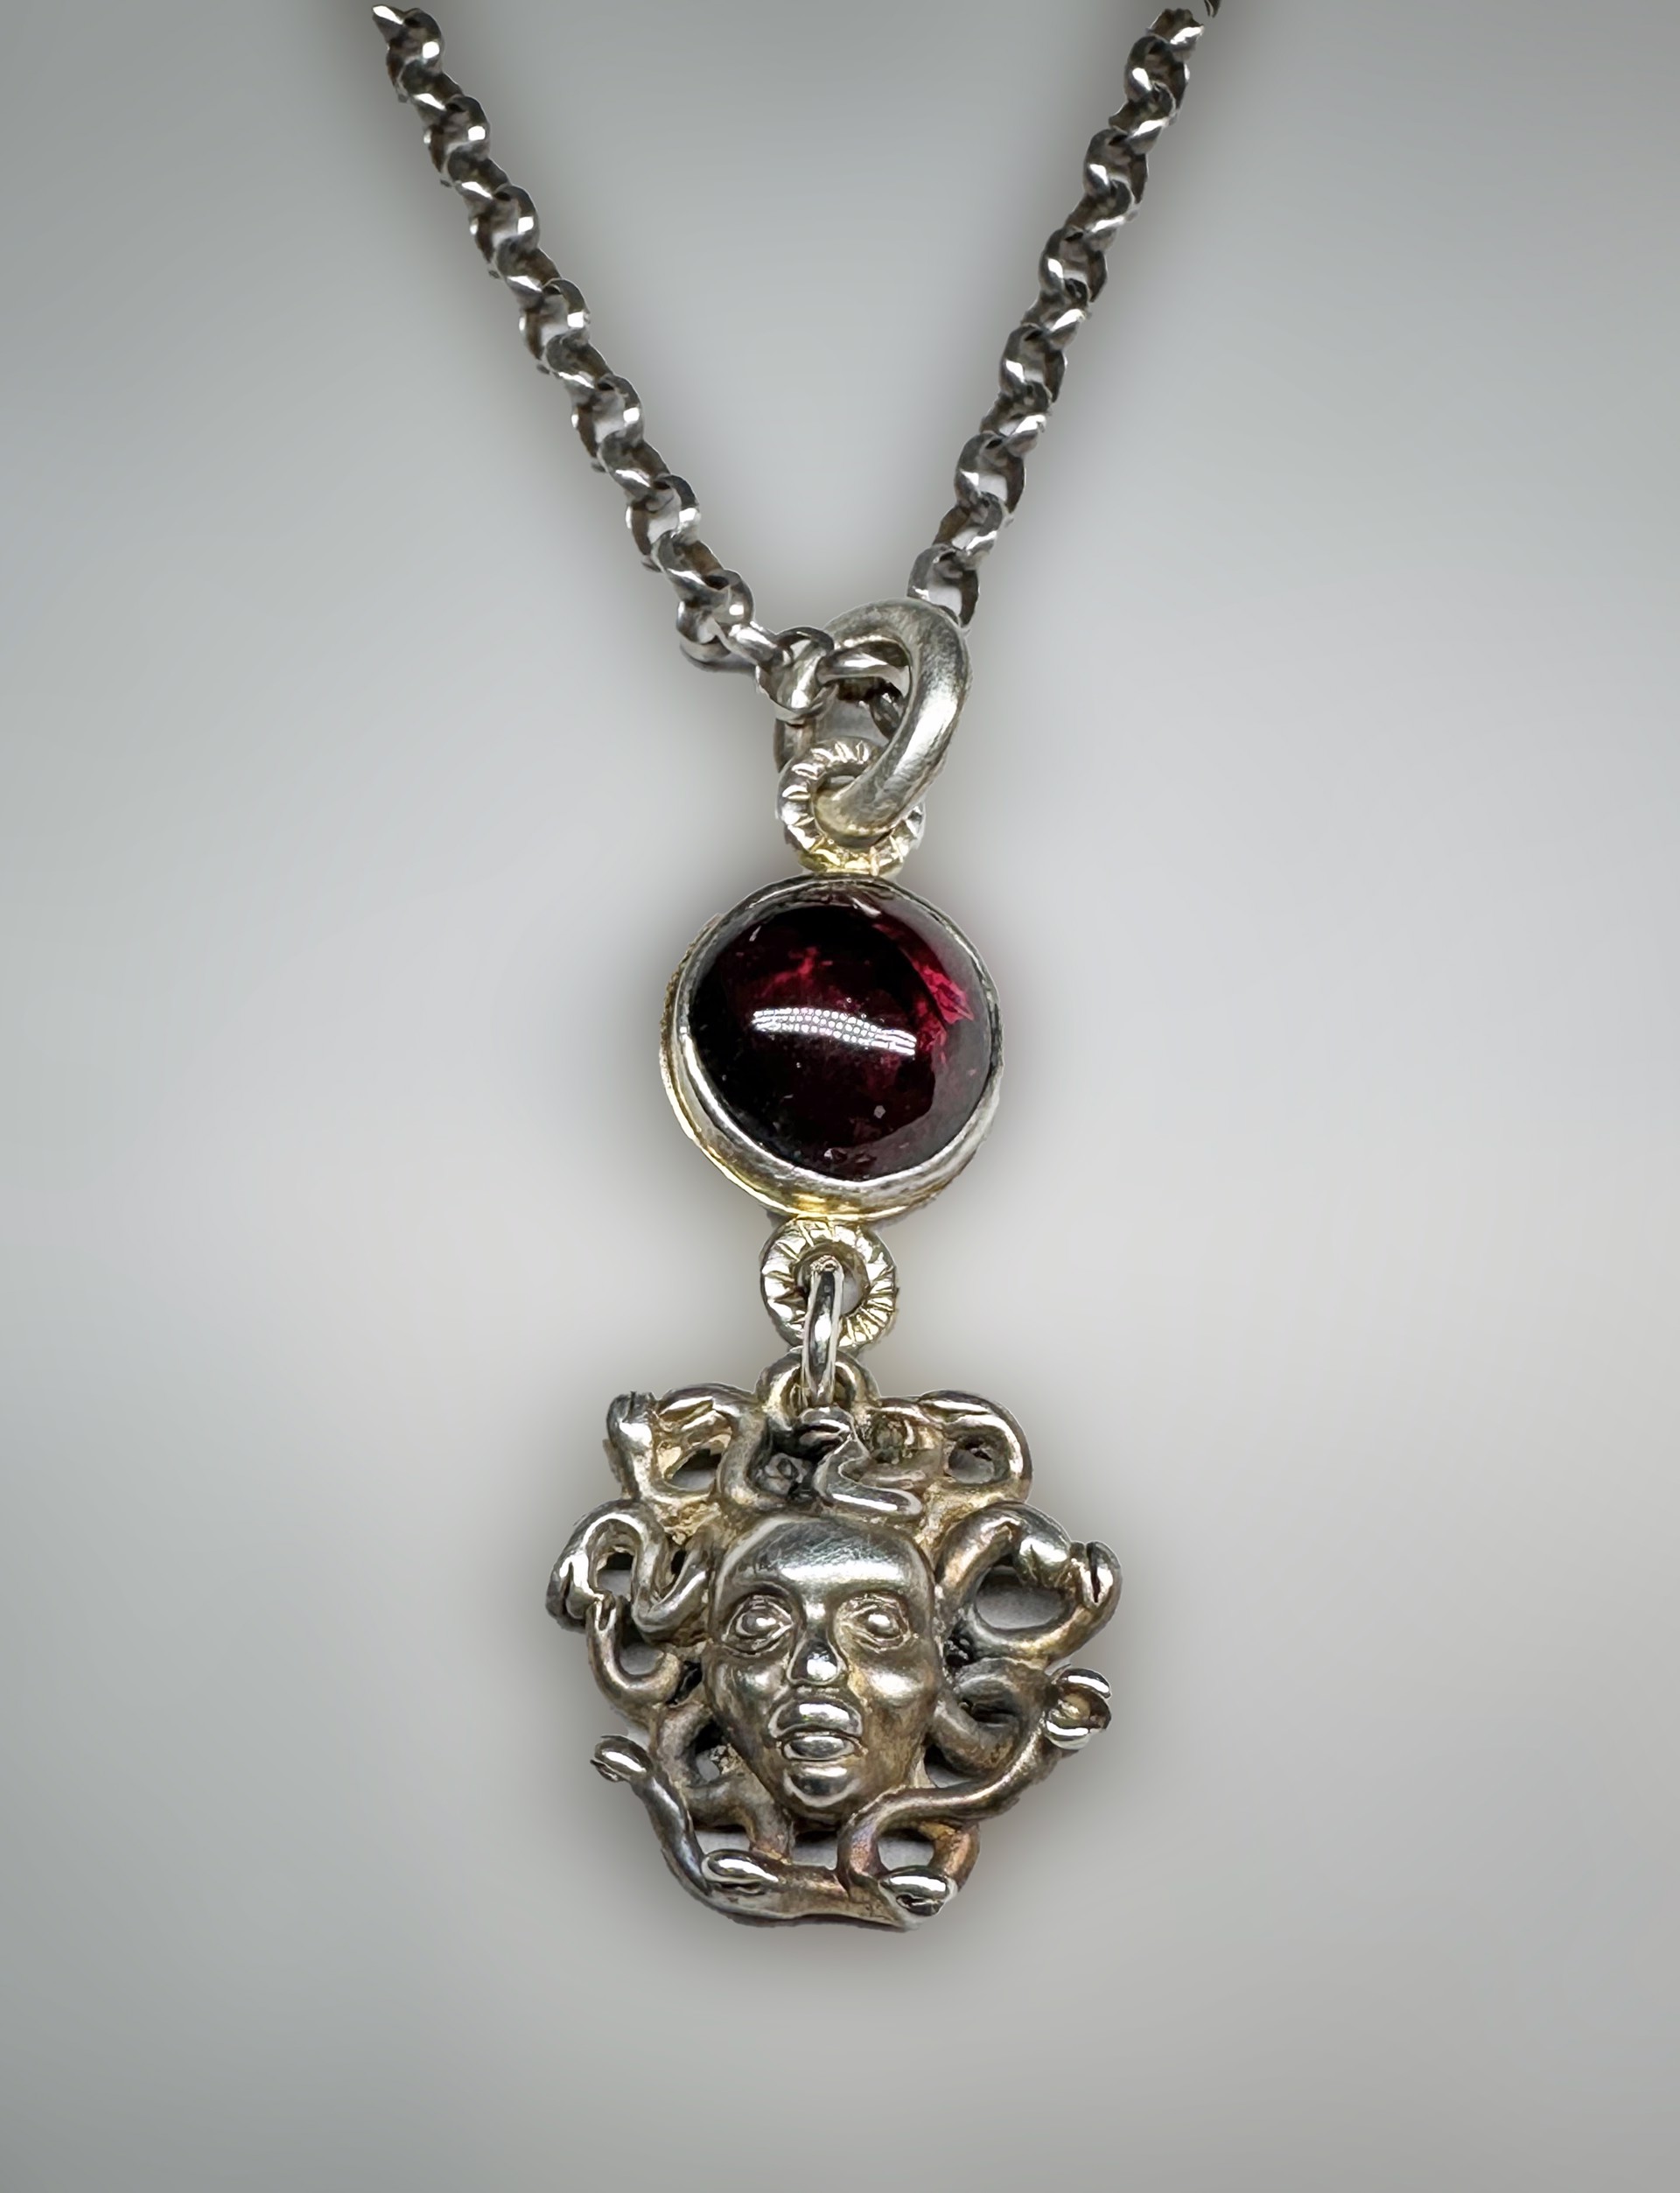 Sterling Silver Pendant with Cast Medusa by Tabor Porter